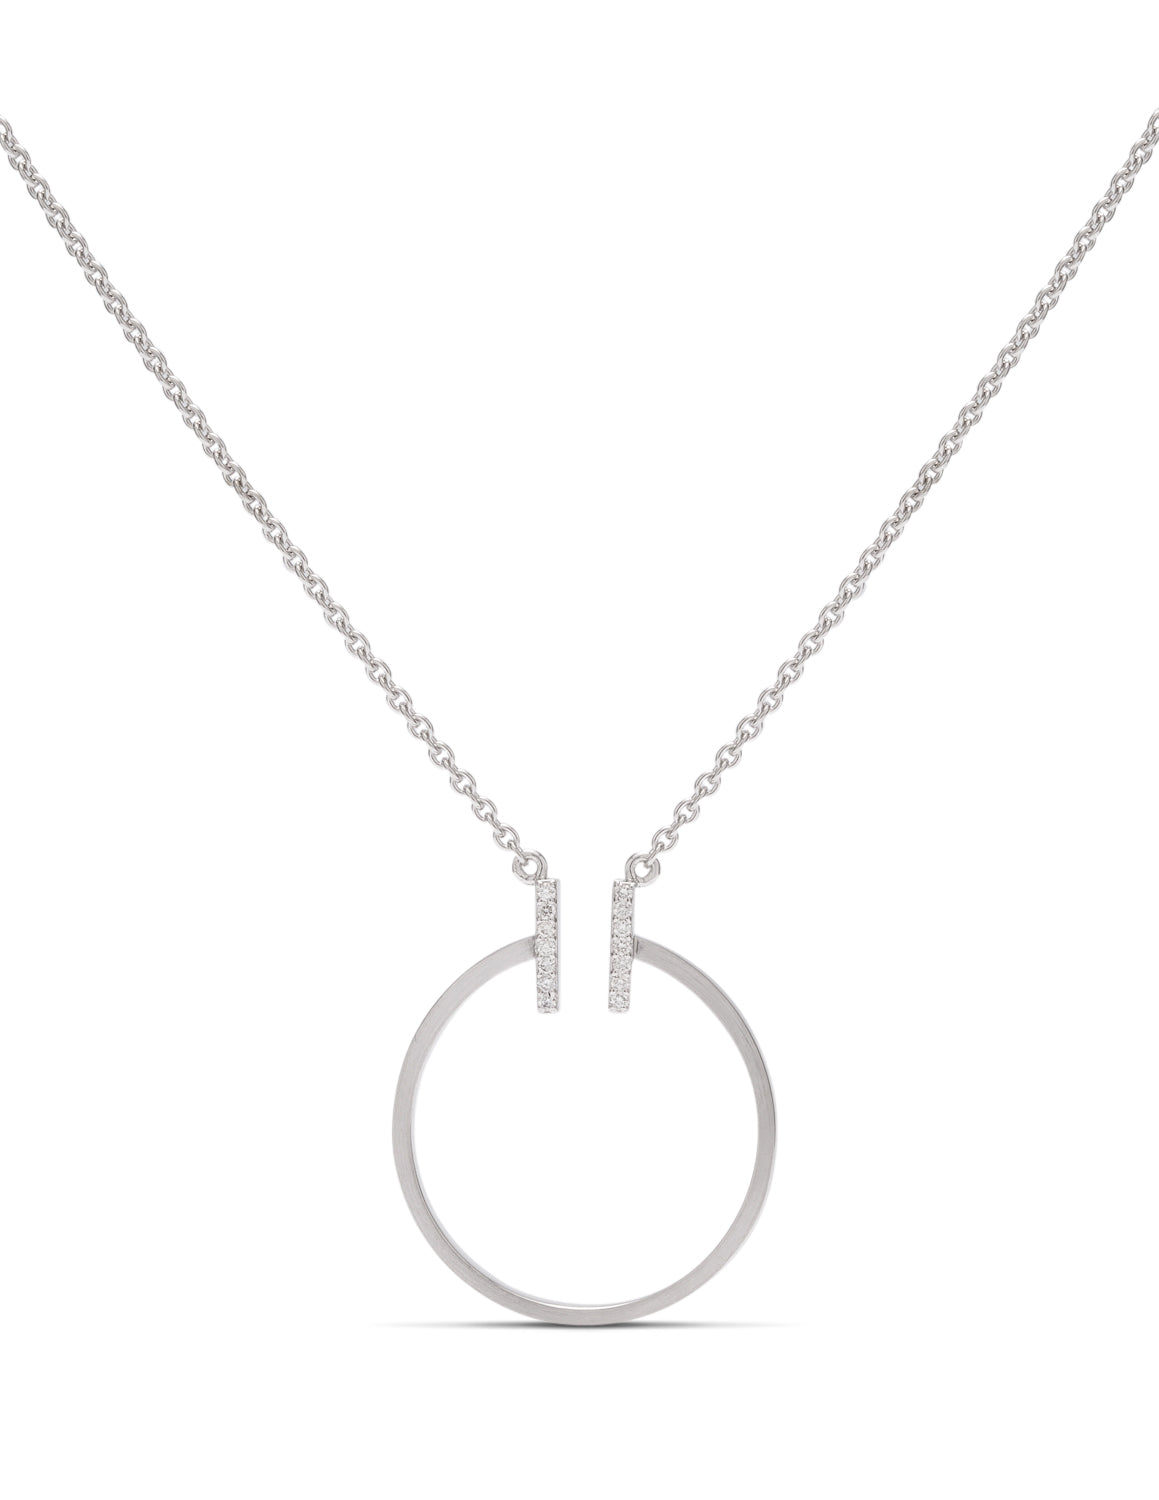 Double Bar Circle Necklace - Charles Koll Jewellers